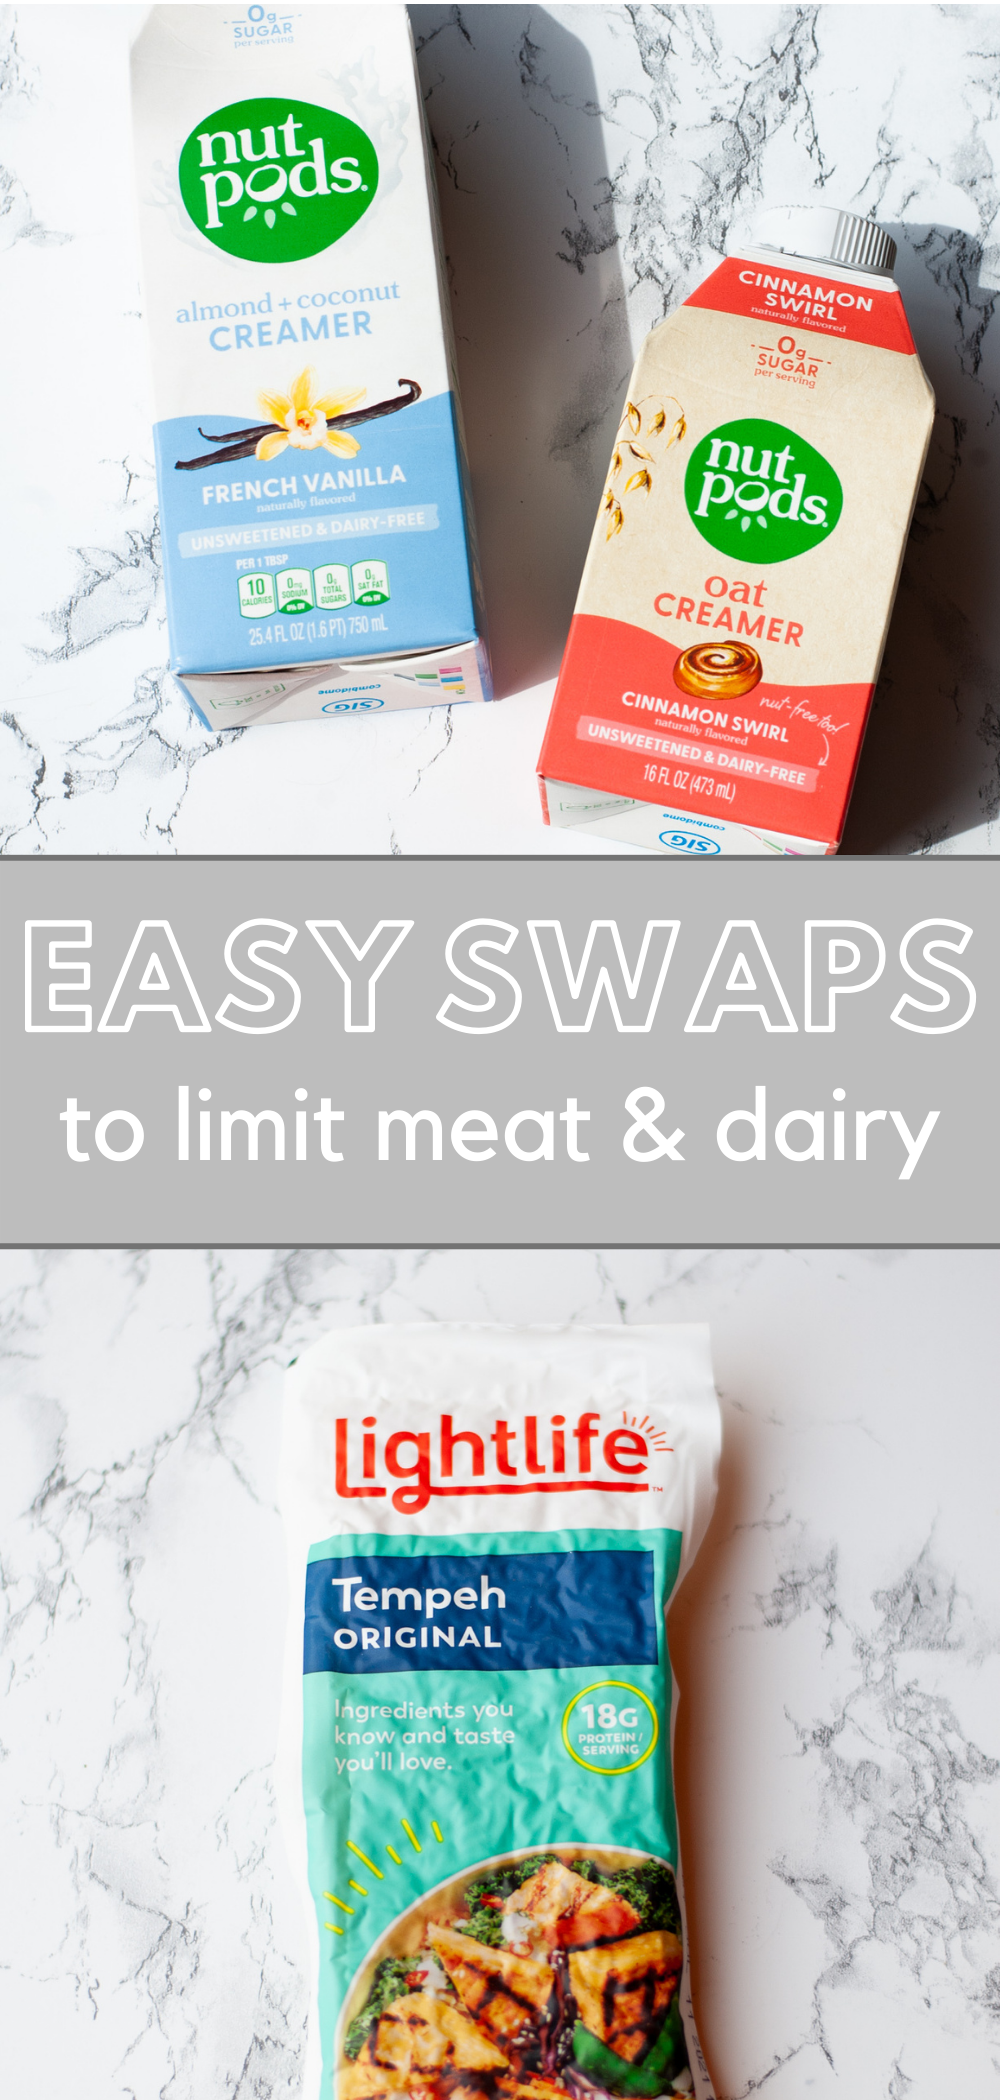 A list of my favorite vegan/vegetarian swaps to help limit your meat & dairy consumption! From simple swaps like lentils to my favorite cheese substitutes.